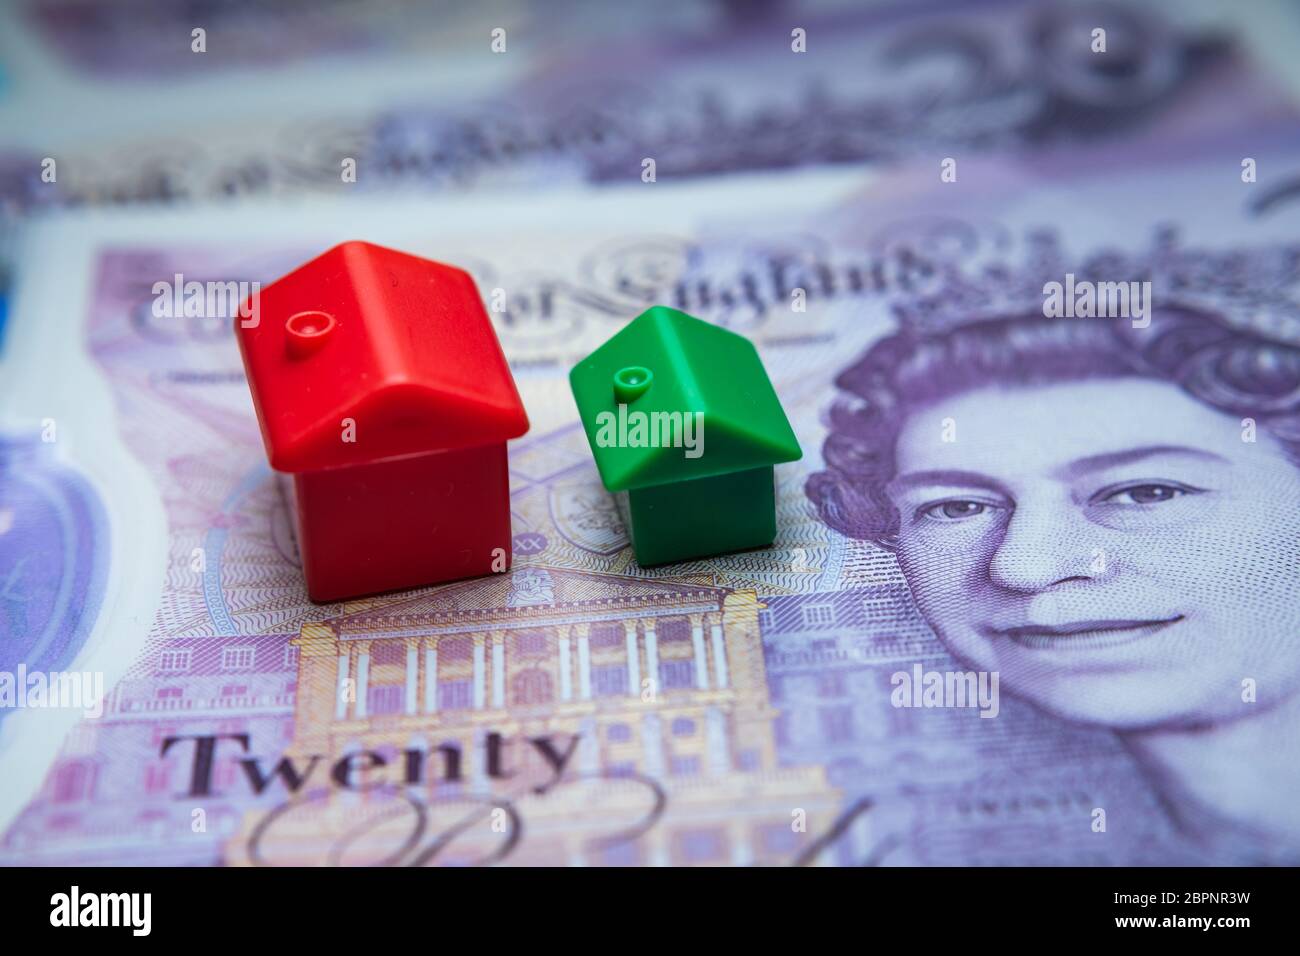 The red toy house placed on top of 20 British pound notes. Macro photo. Concept image for UK House Price Index, first home, mortgage, real estate or h Stock Photo